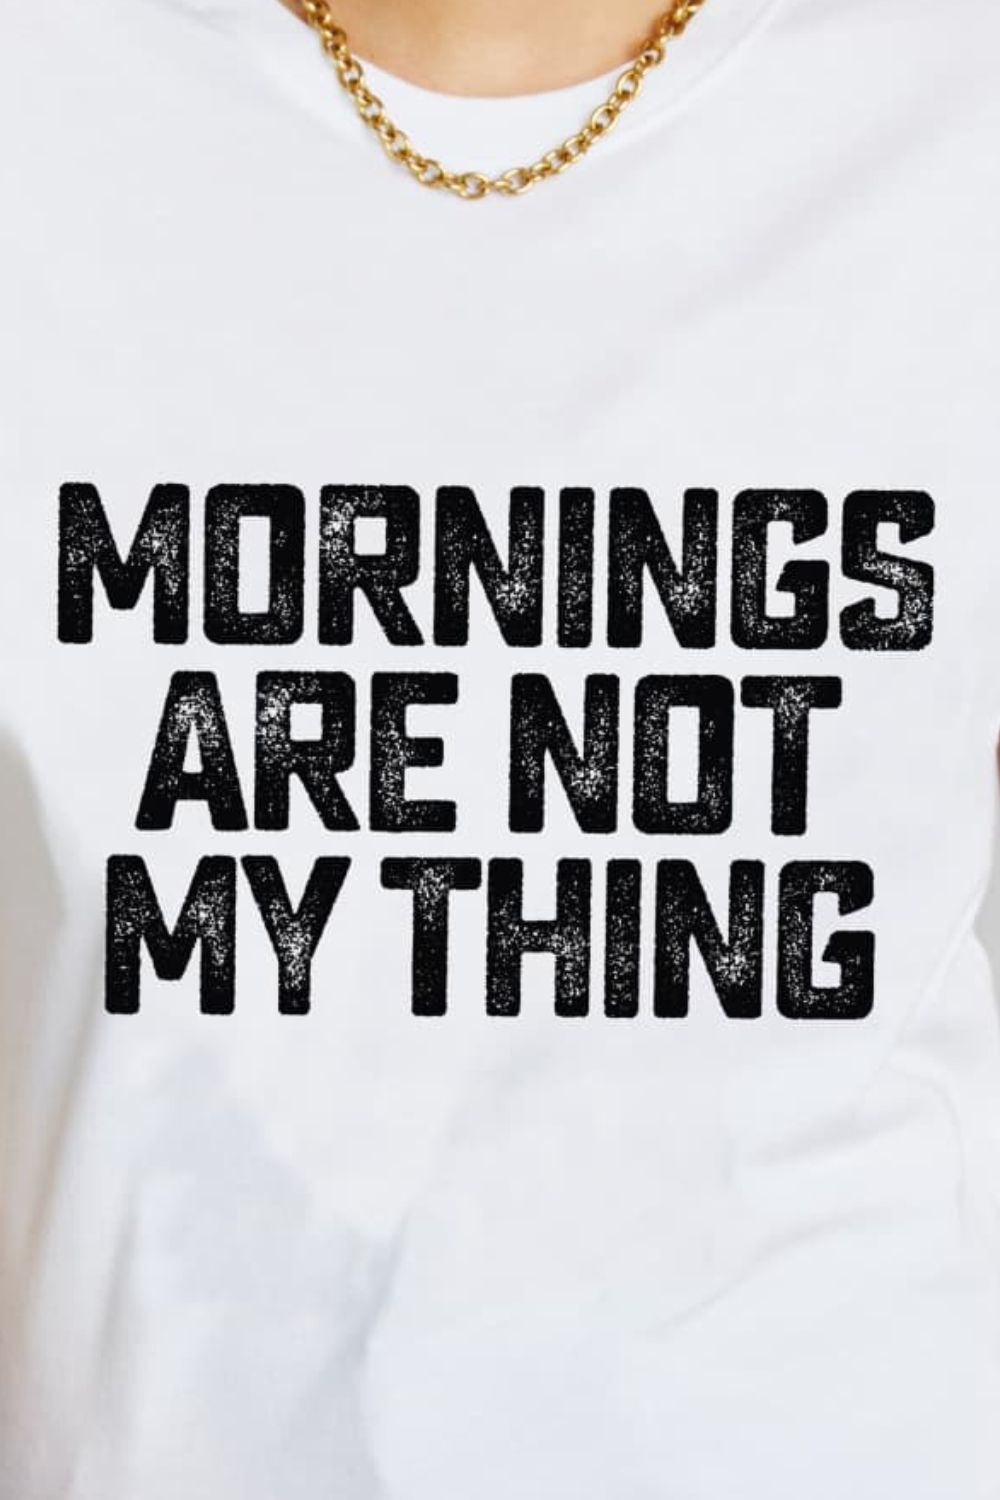 Simply Love Full Size MORNINGS ARE NOT MY THING Cotton T-Shirt (2 Colors)  Krazy Heart Designs Boutique   